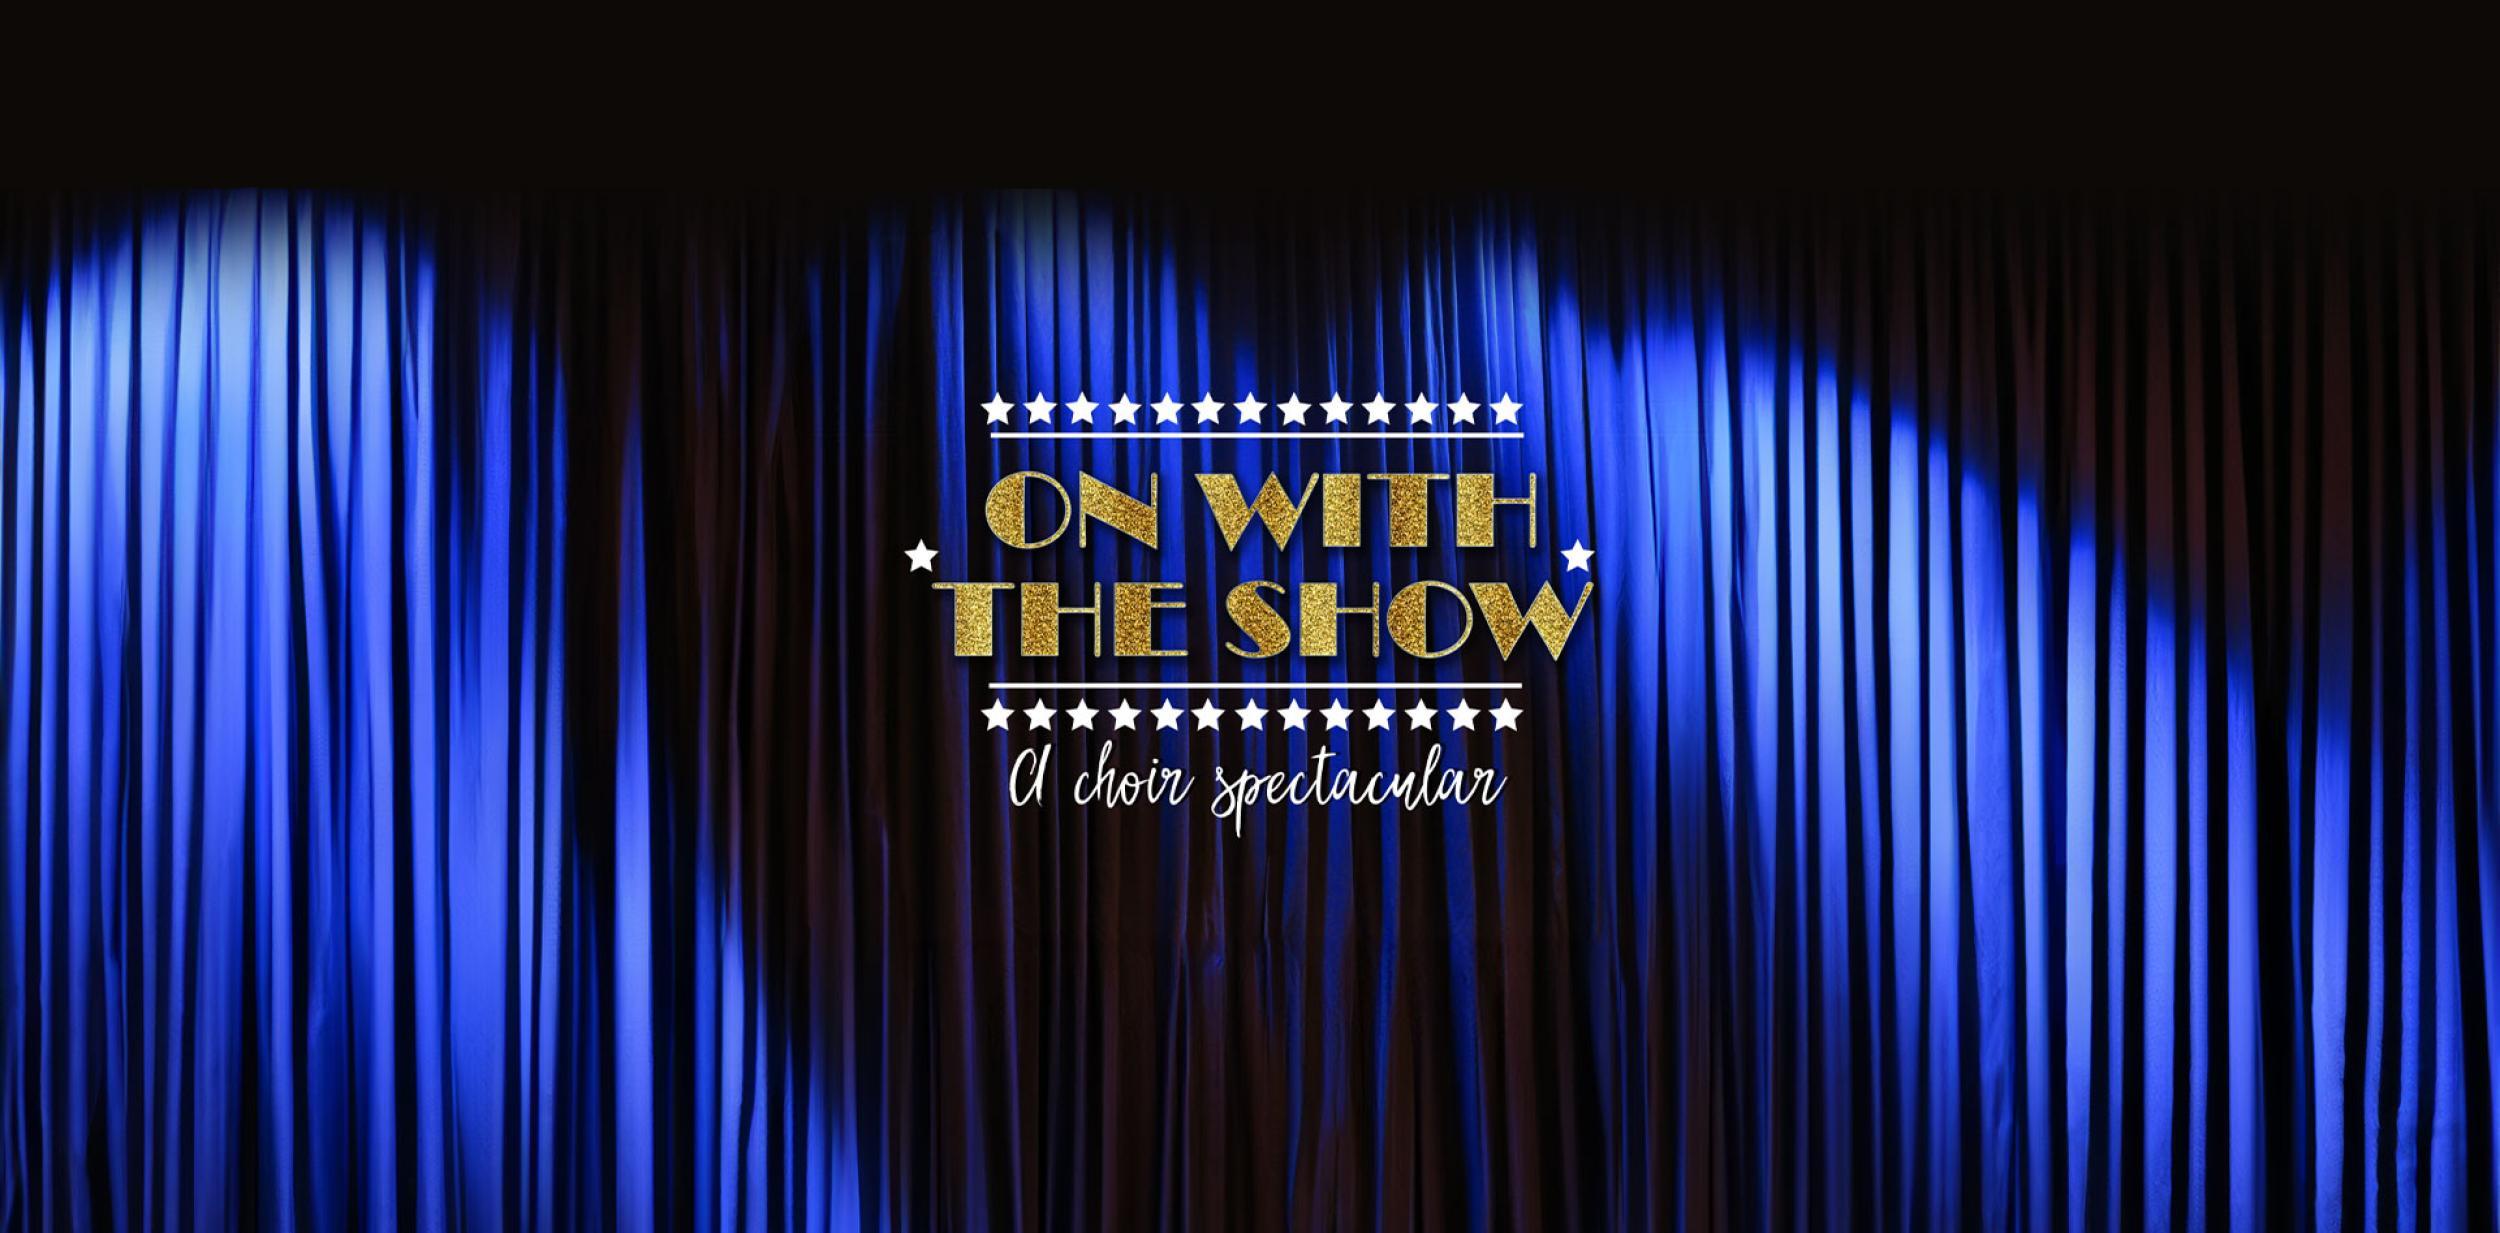 On with the Show logo against a blue theatre curtain background